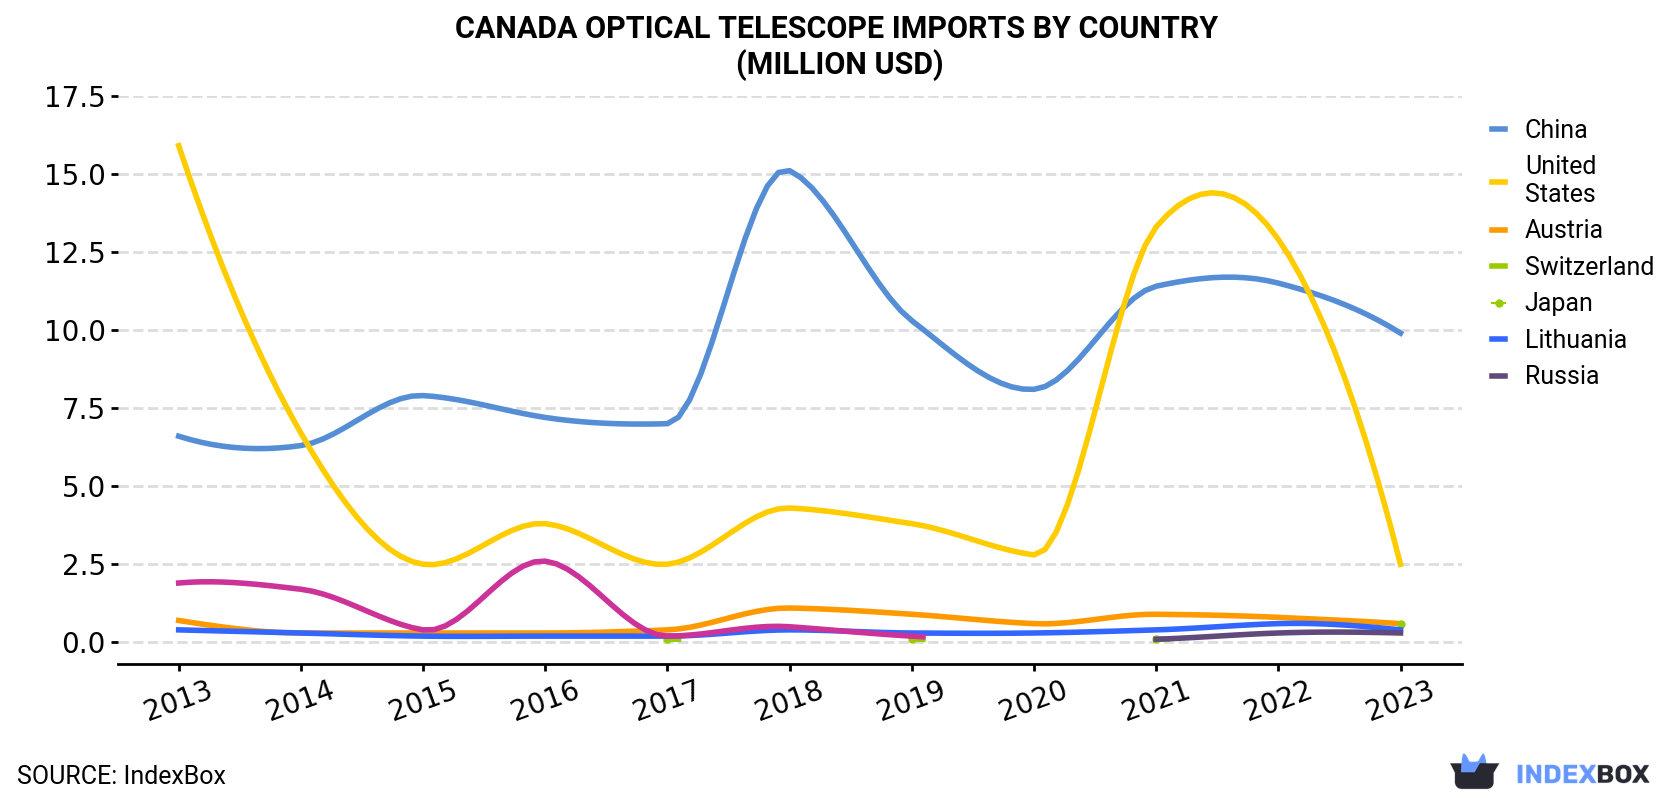 Canada Optical Telescope Imports By Country (Million USD)